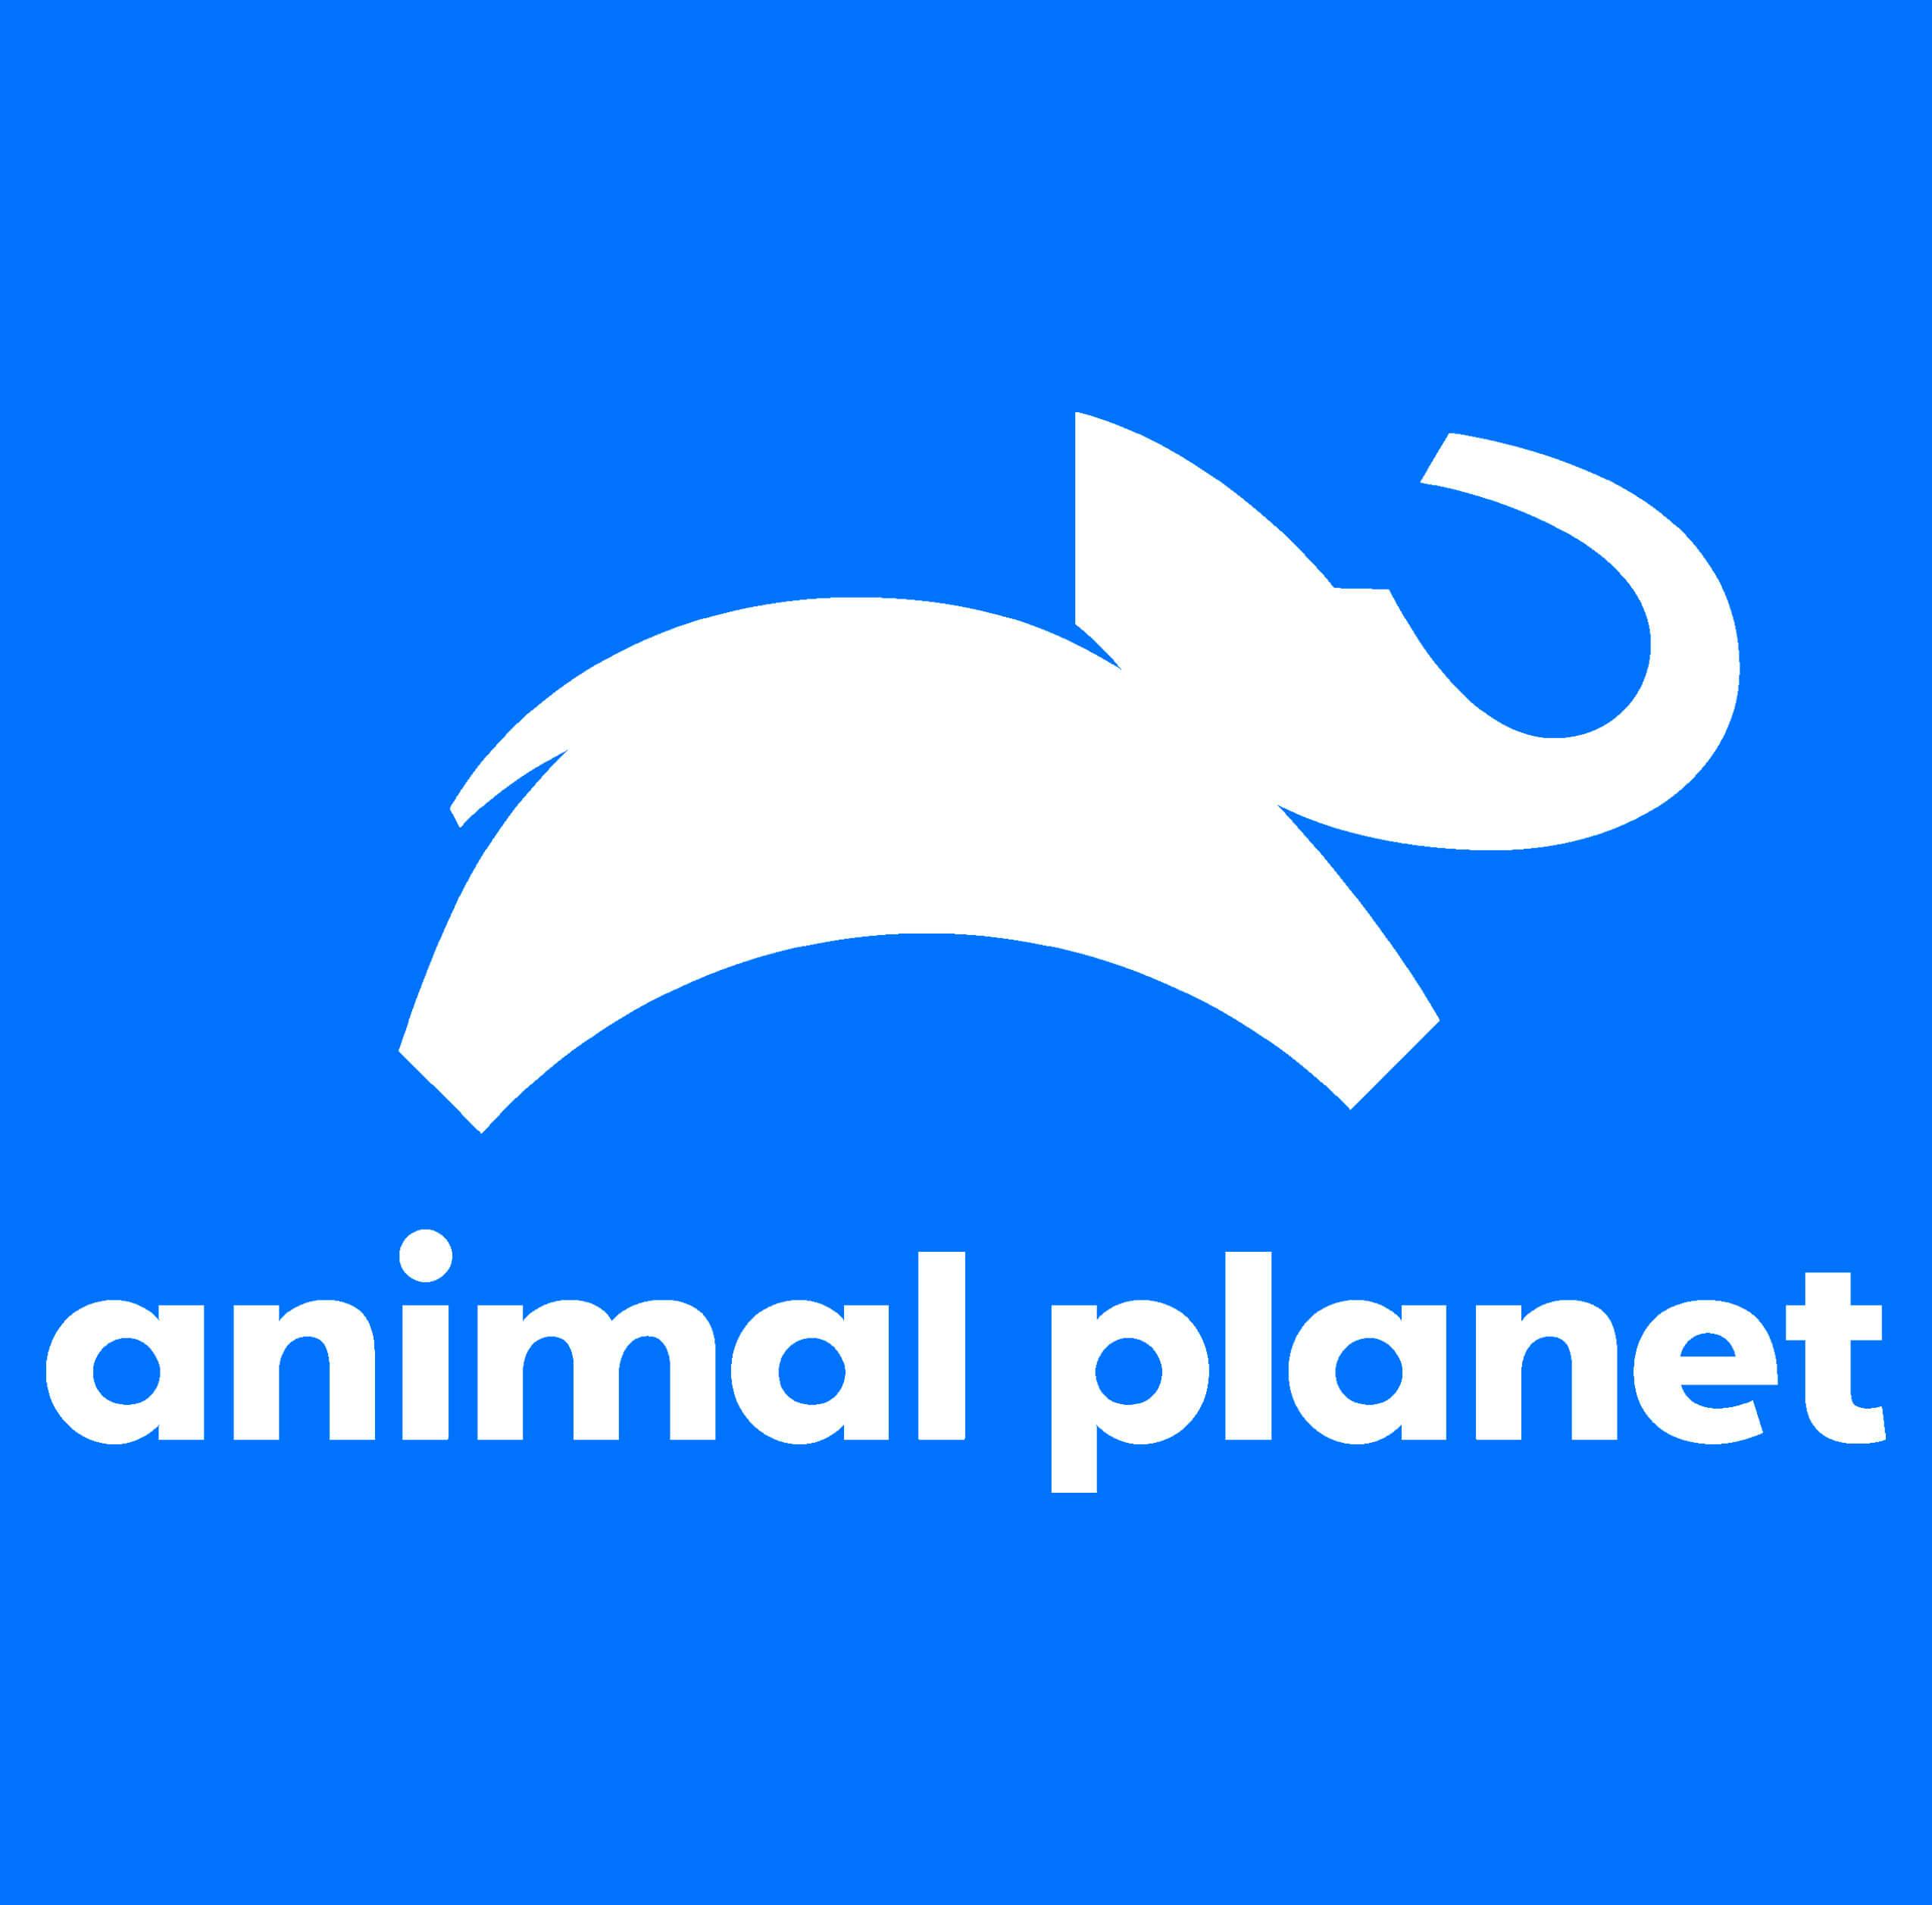 Animal Planet: 3 Ways to Watch Animal Planet Online for Free (Feb. '20)